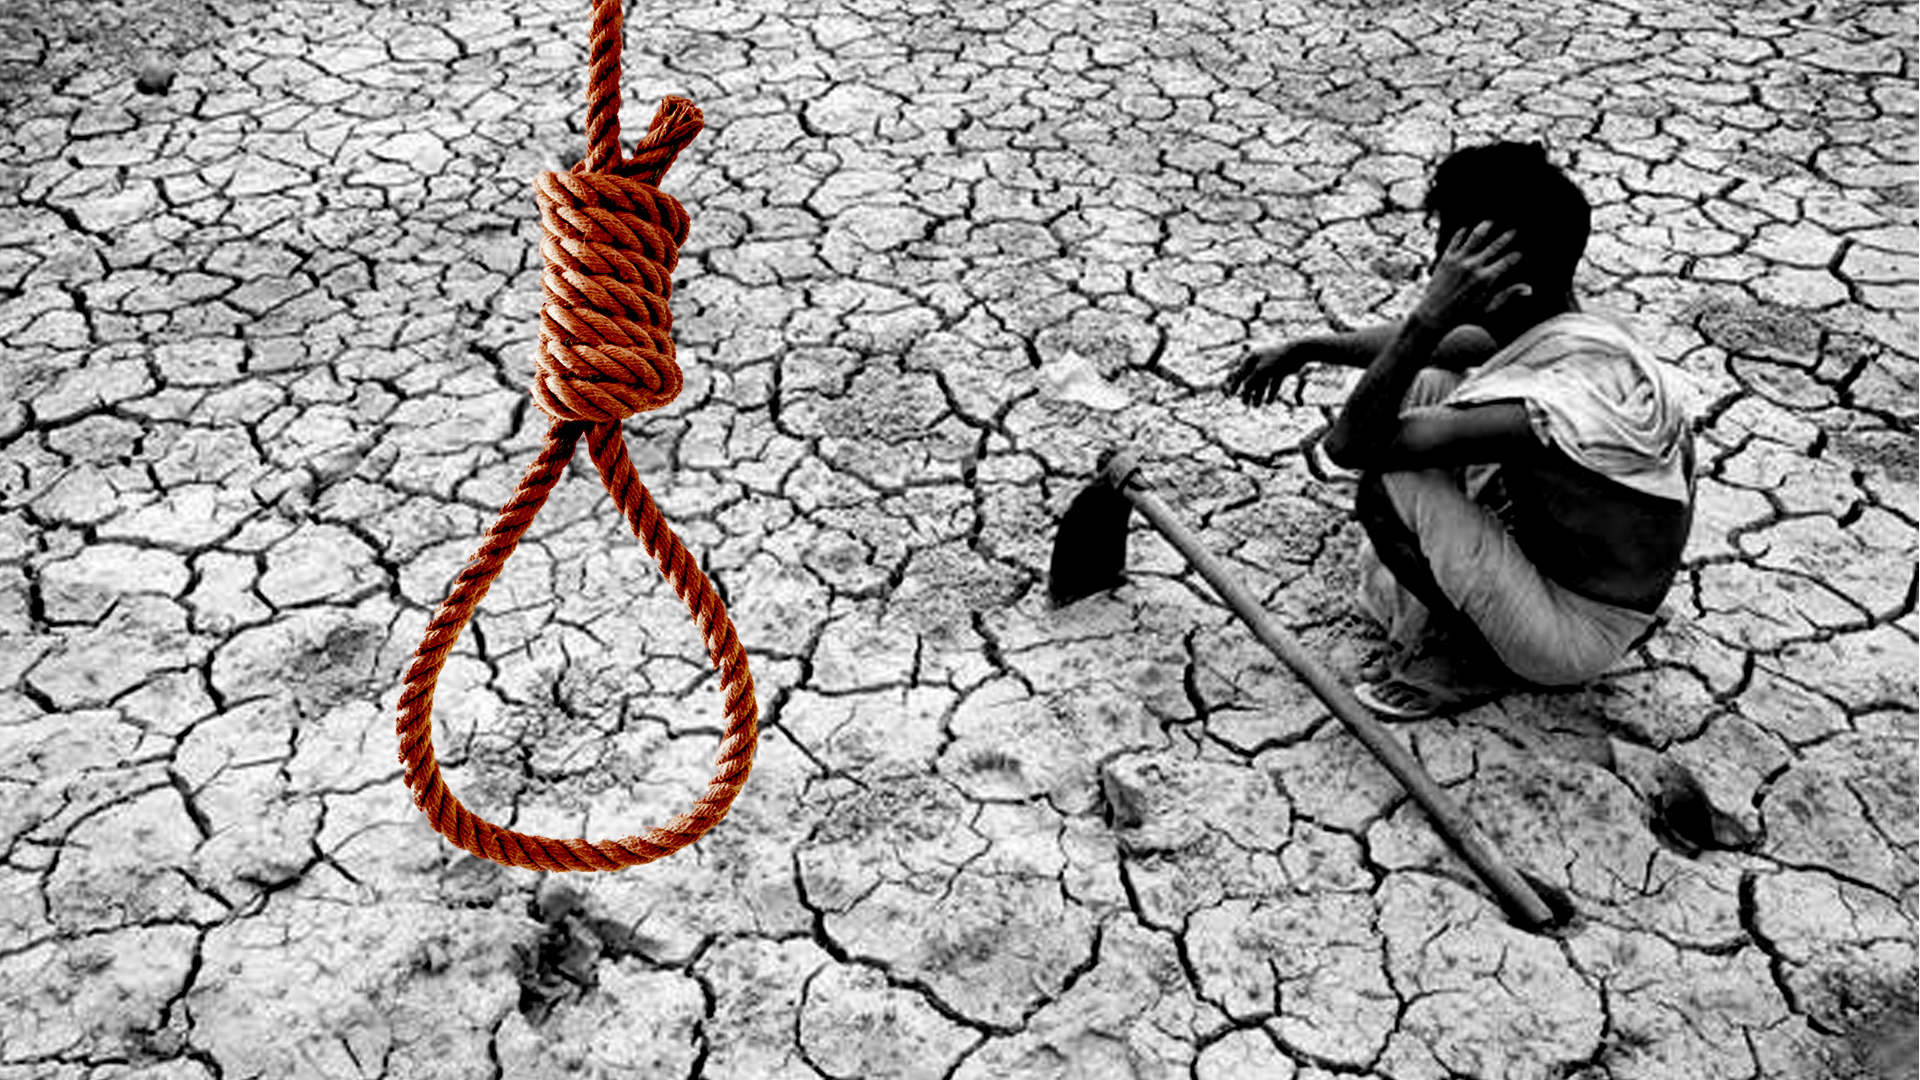 Over 800 Farmers Committed Suicide in Maharashtra This Year, Says Report |  NewsClick